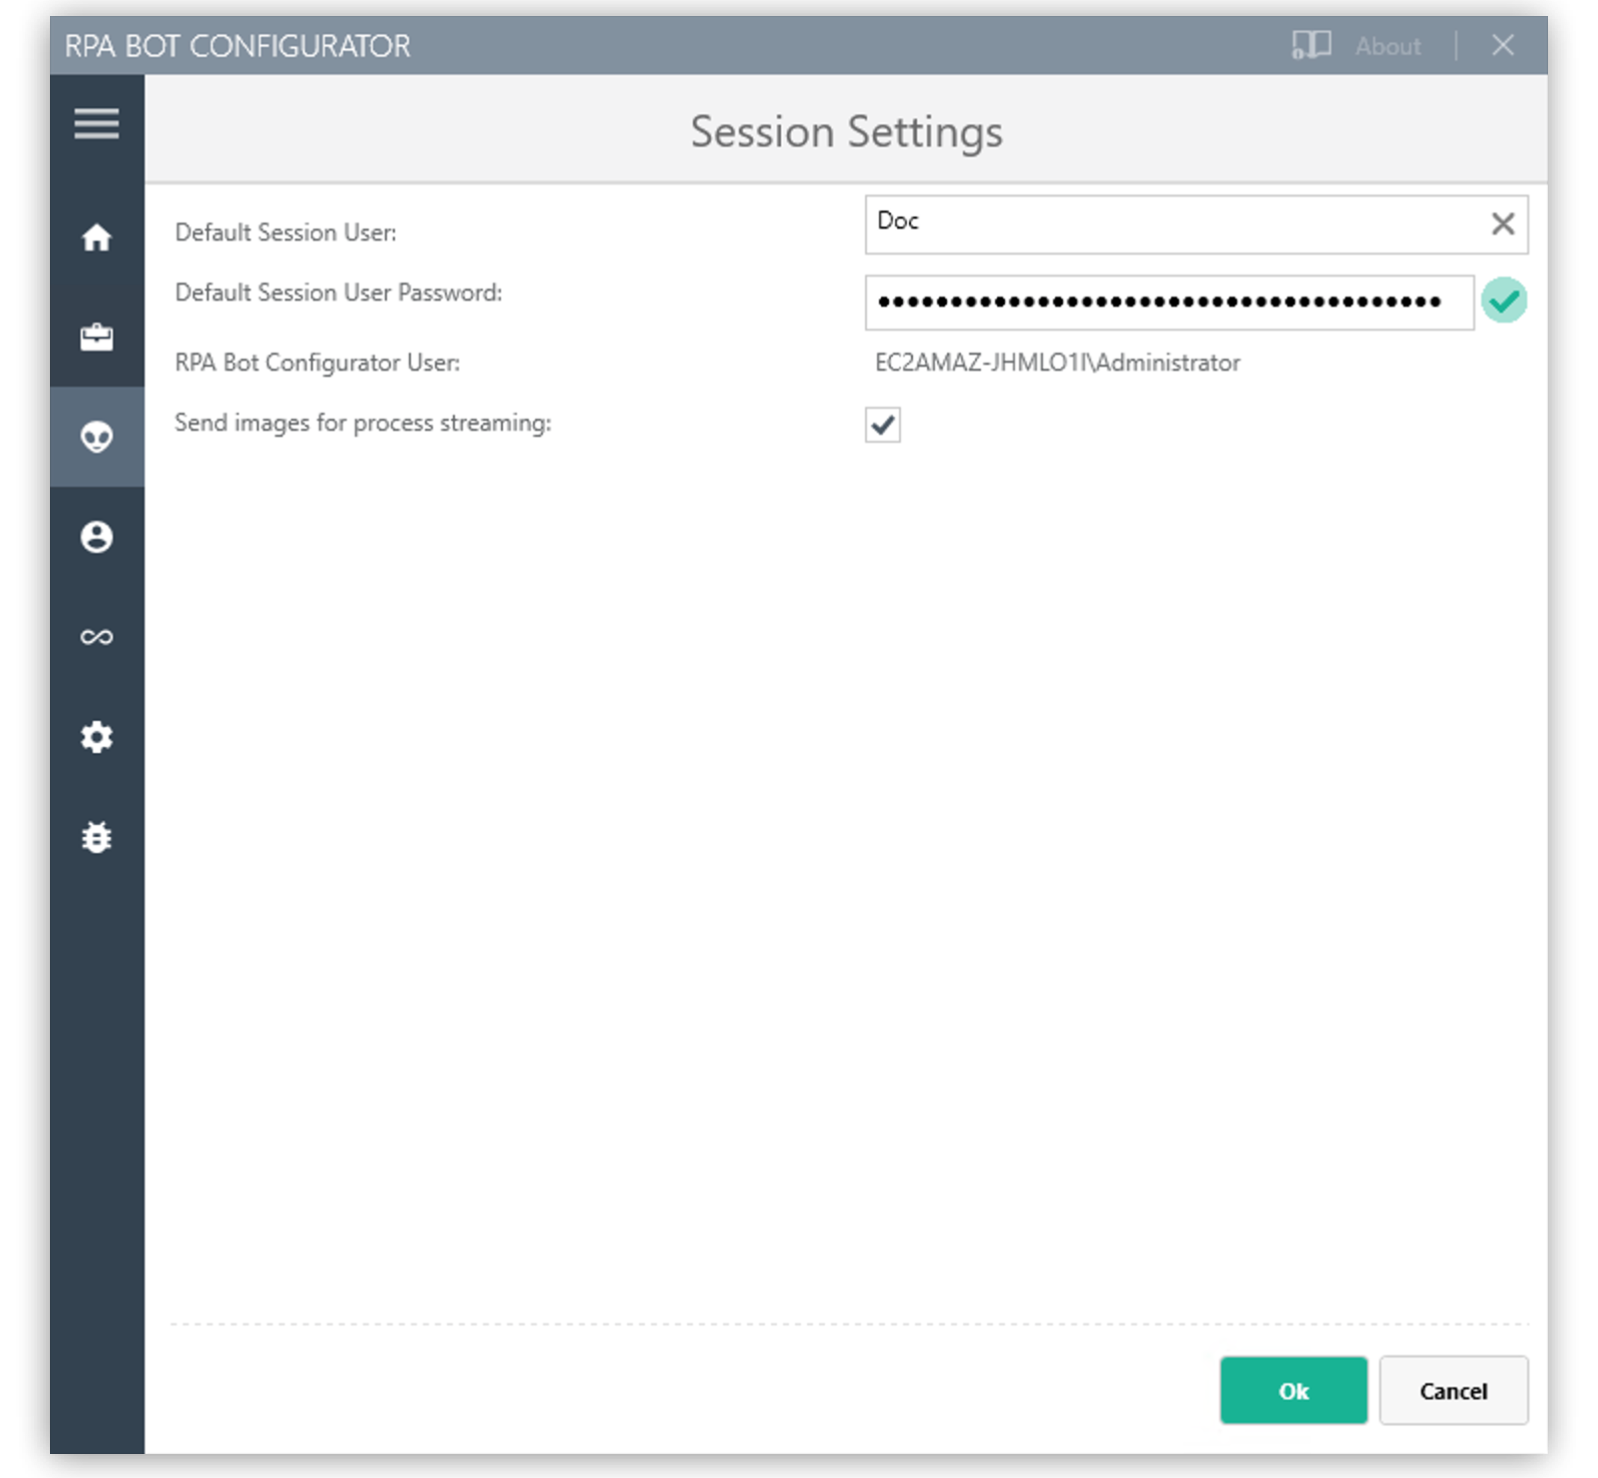 The RPA Bot Configurator application showing the Secure Session settings panel